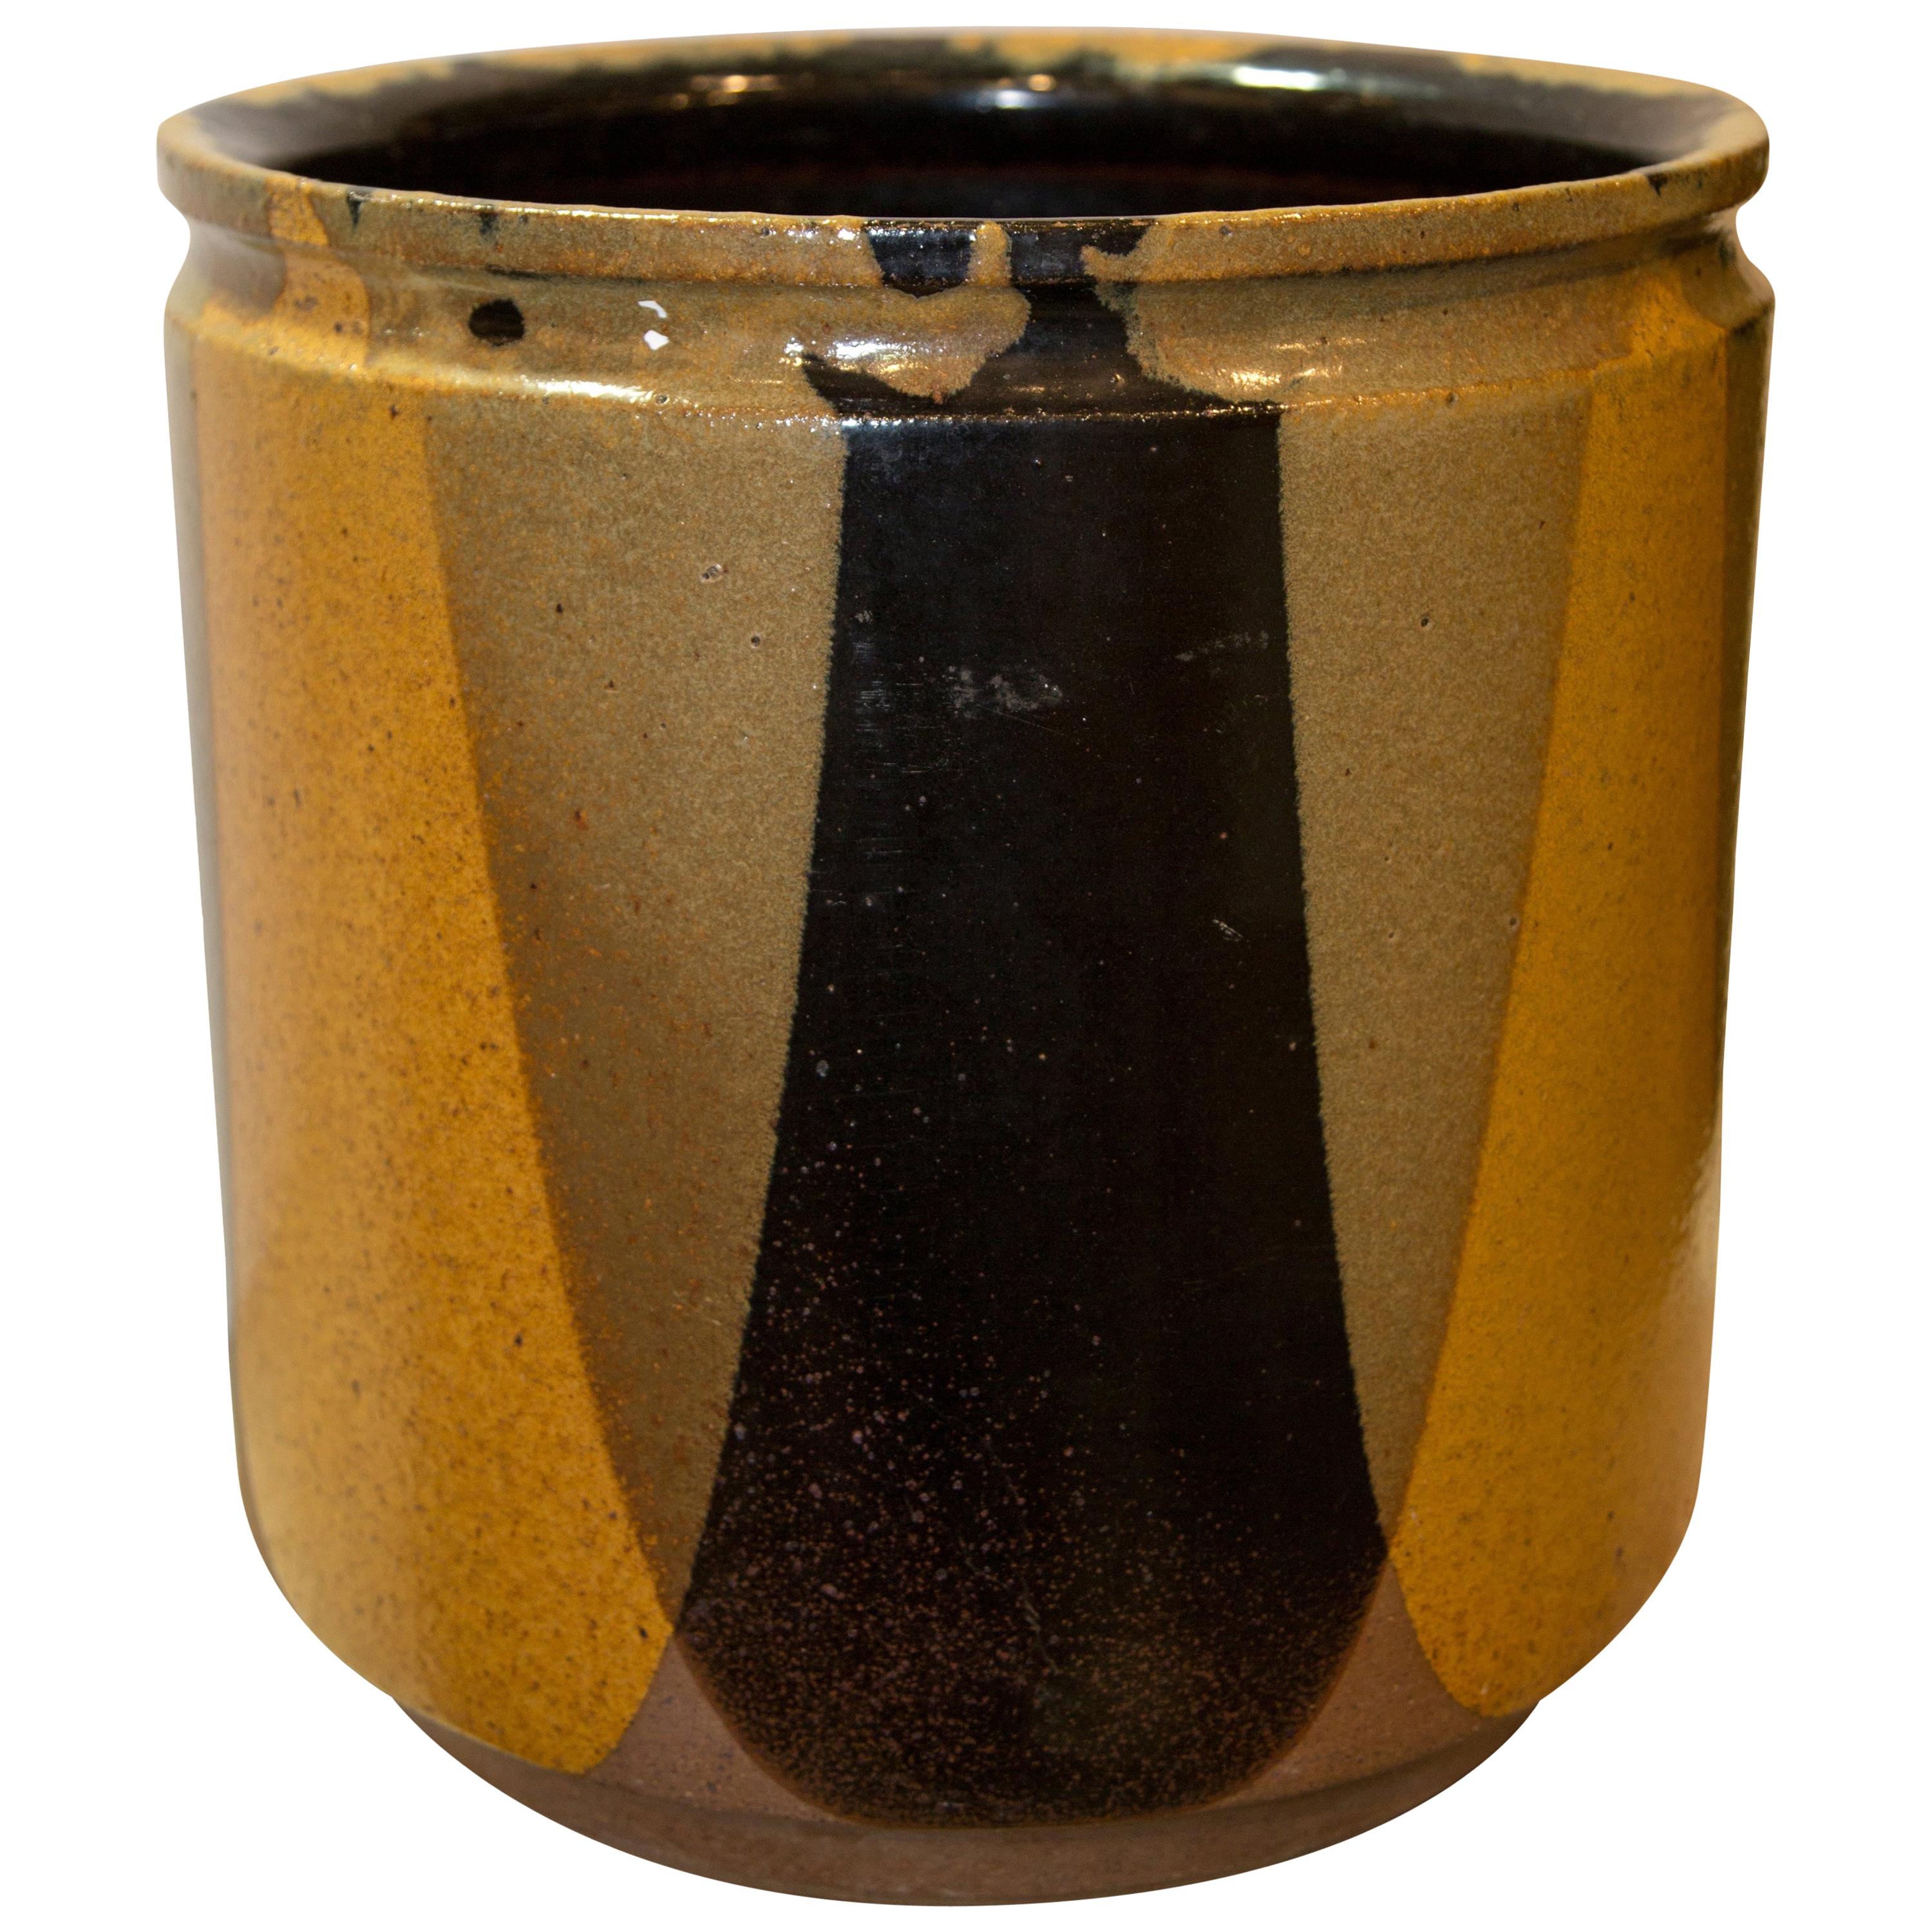 Midcentury American Modern Flame Glaze Planter by Earth Gender